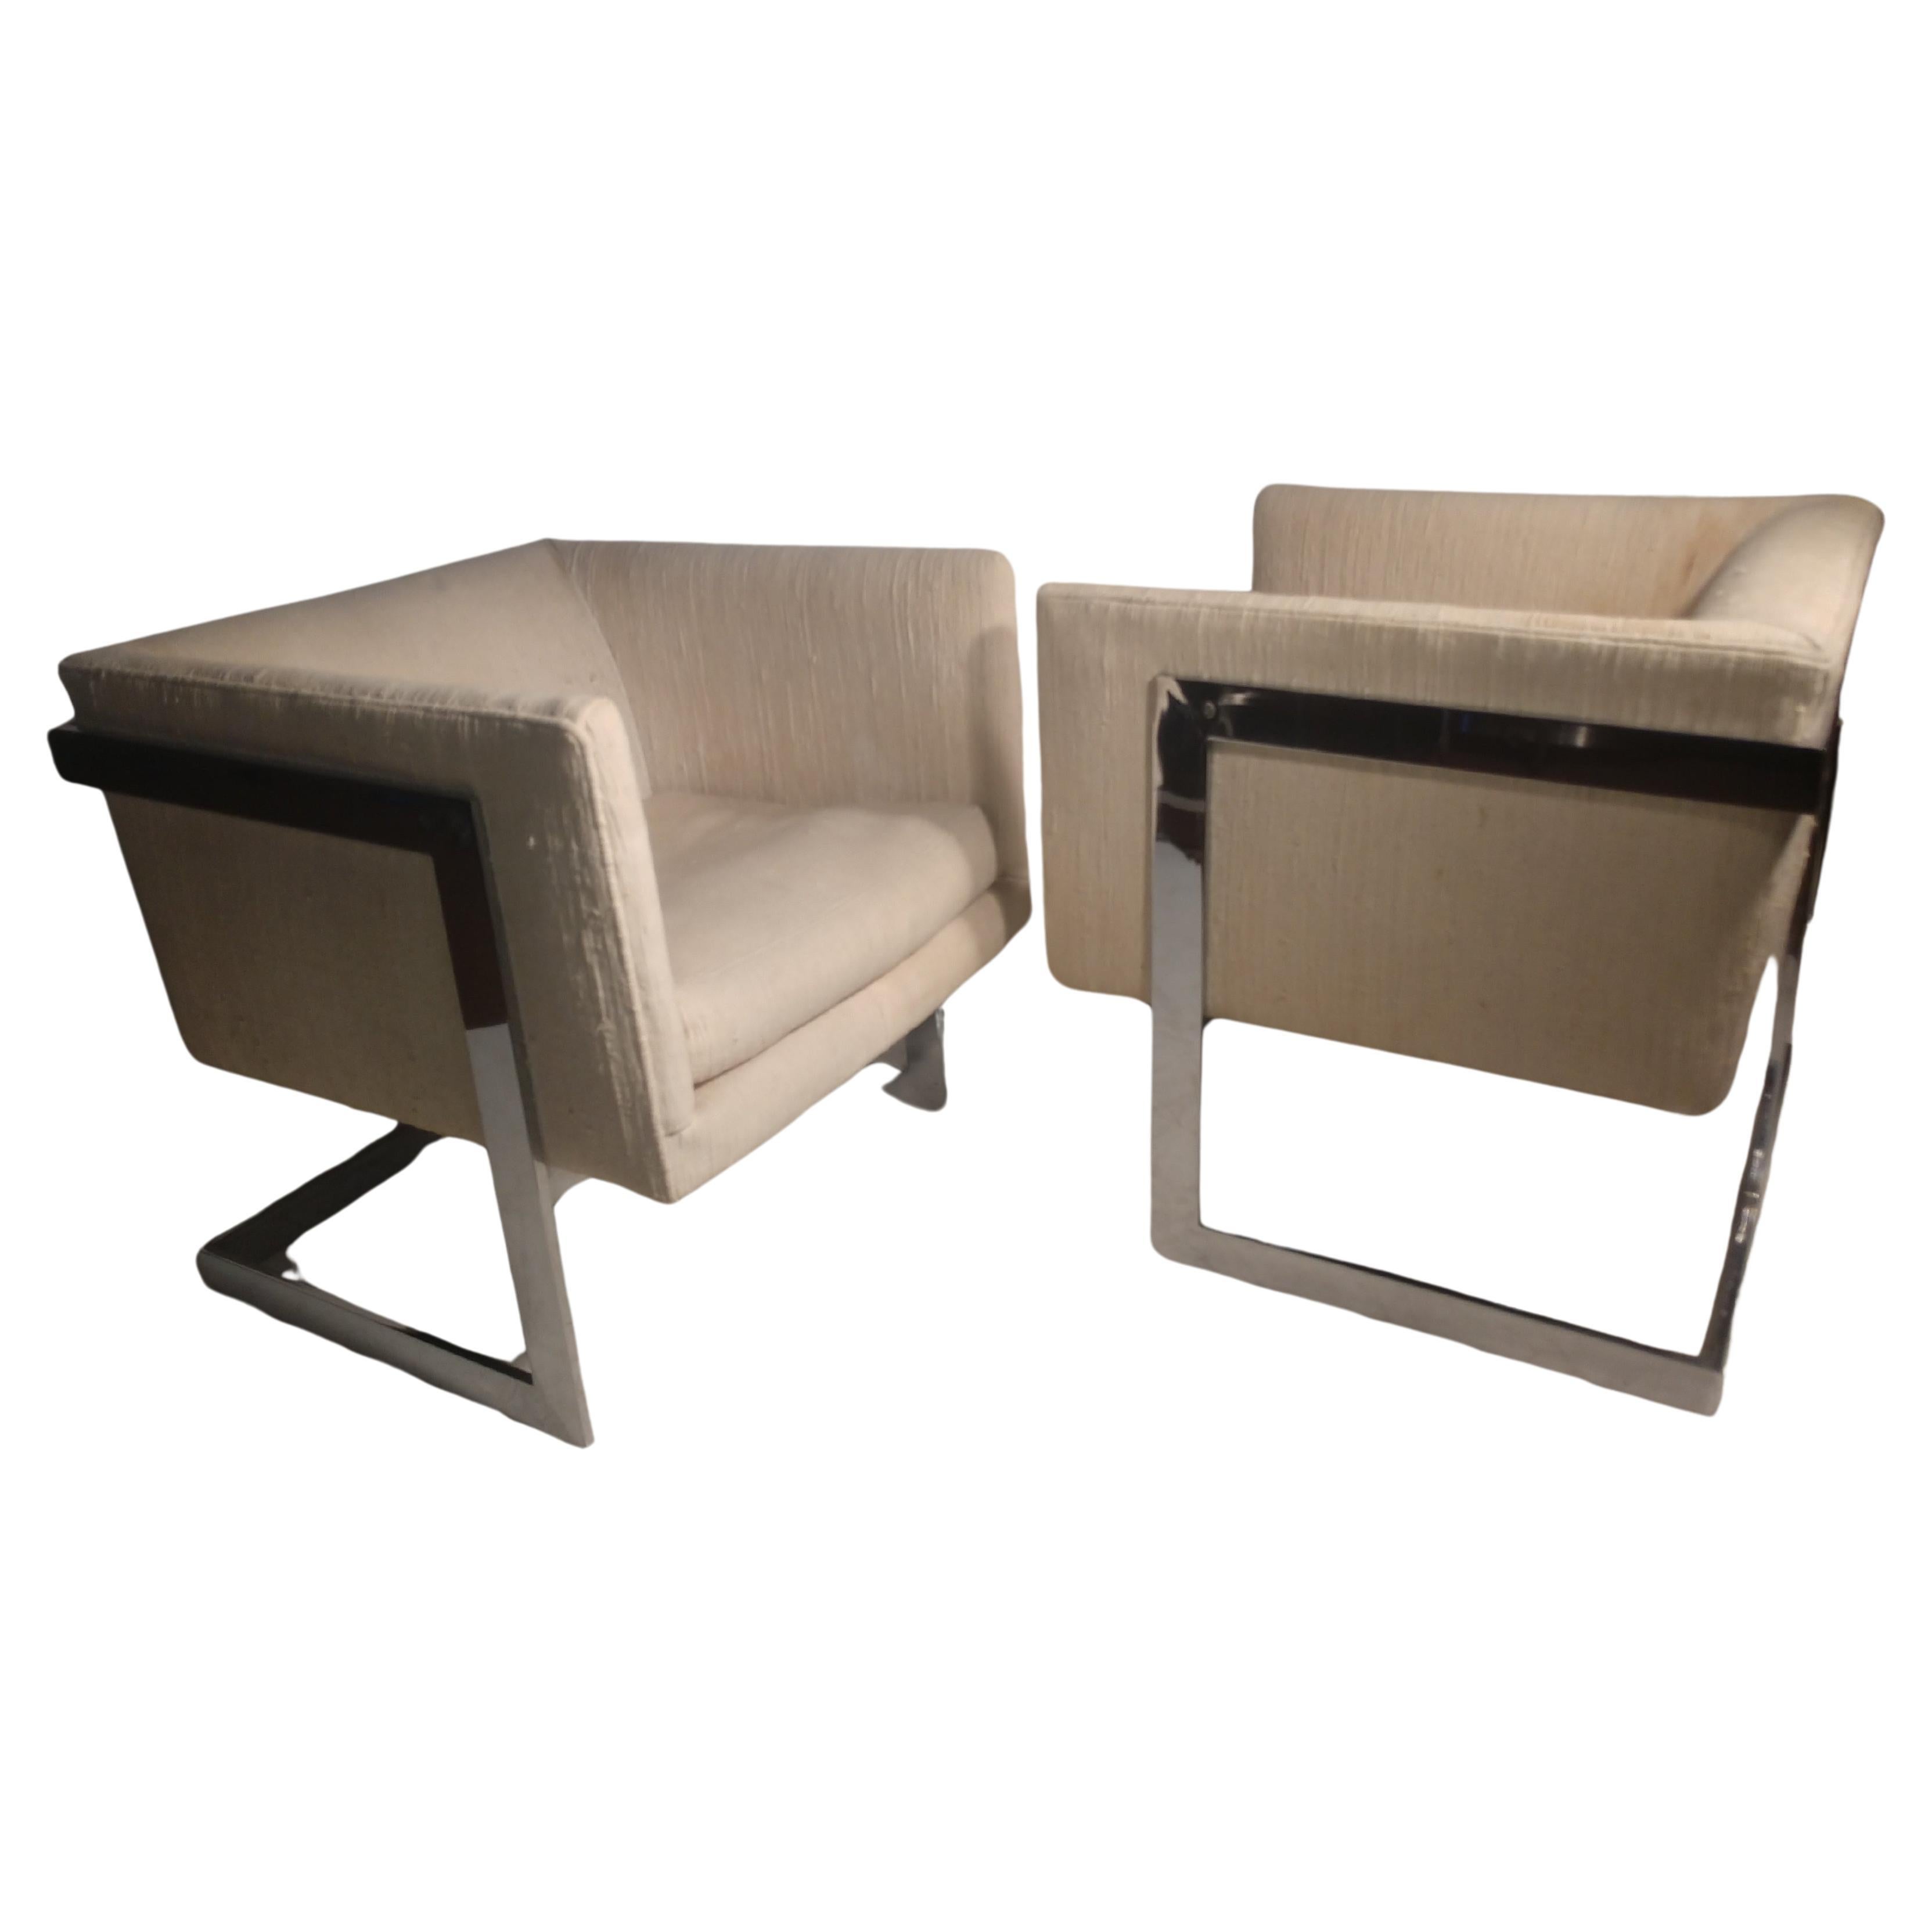 Simple and elegant pair of Mid-Century Modern cube chairs by Milo Baughman for Thayer Coggin. Sold by Bloomingdales New Rochelle NY. In excellent vintage condition with minimal wear. Fabric is stained.